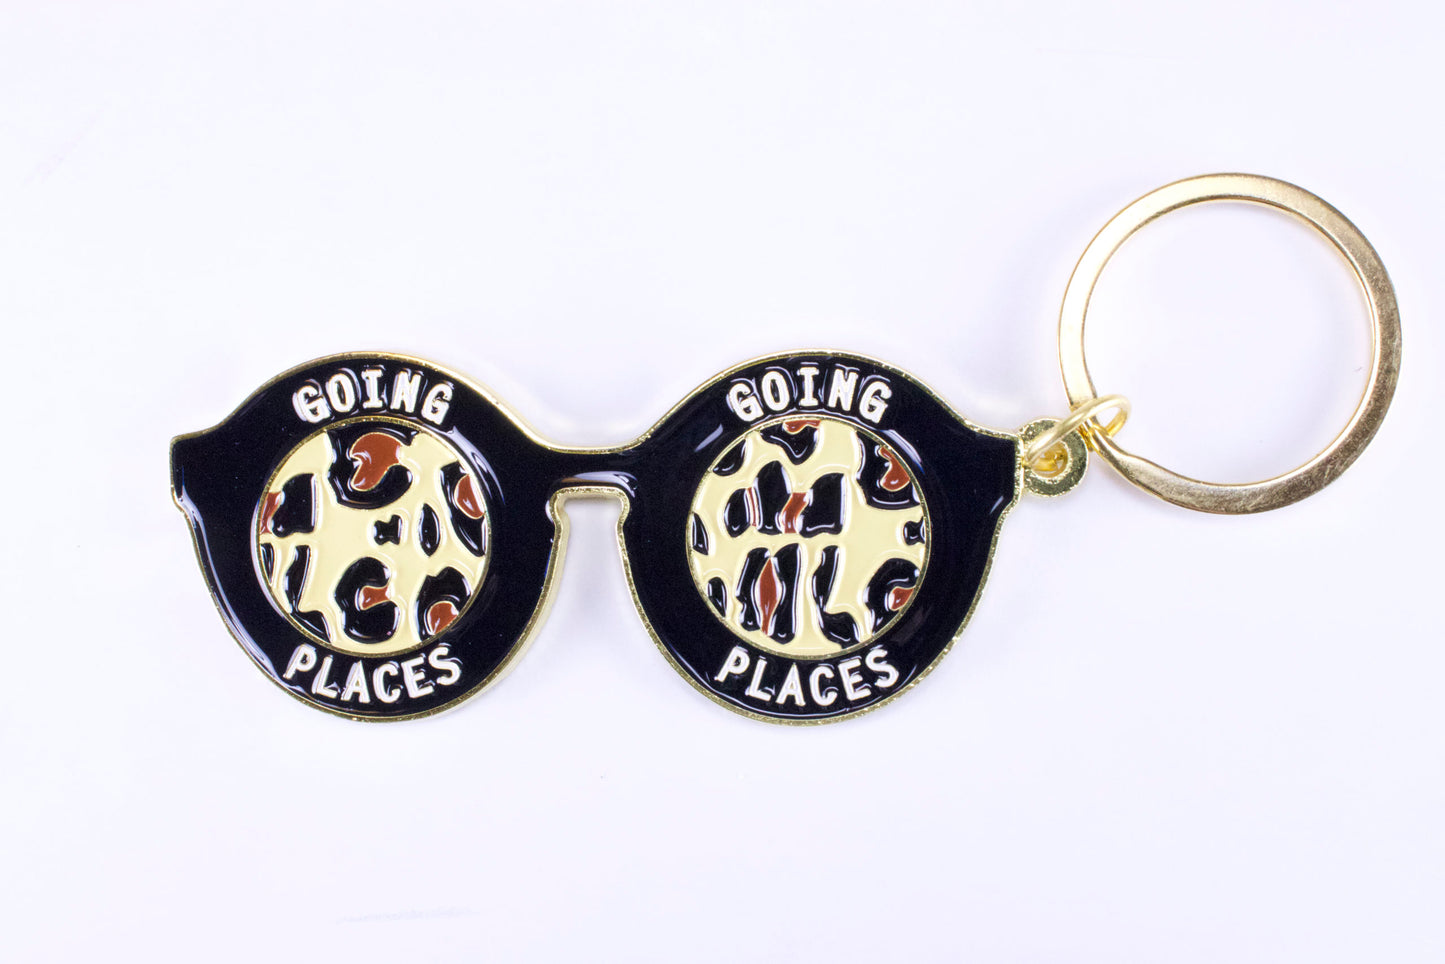 GOING PLACES KEYCHAINS